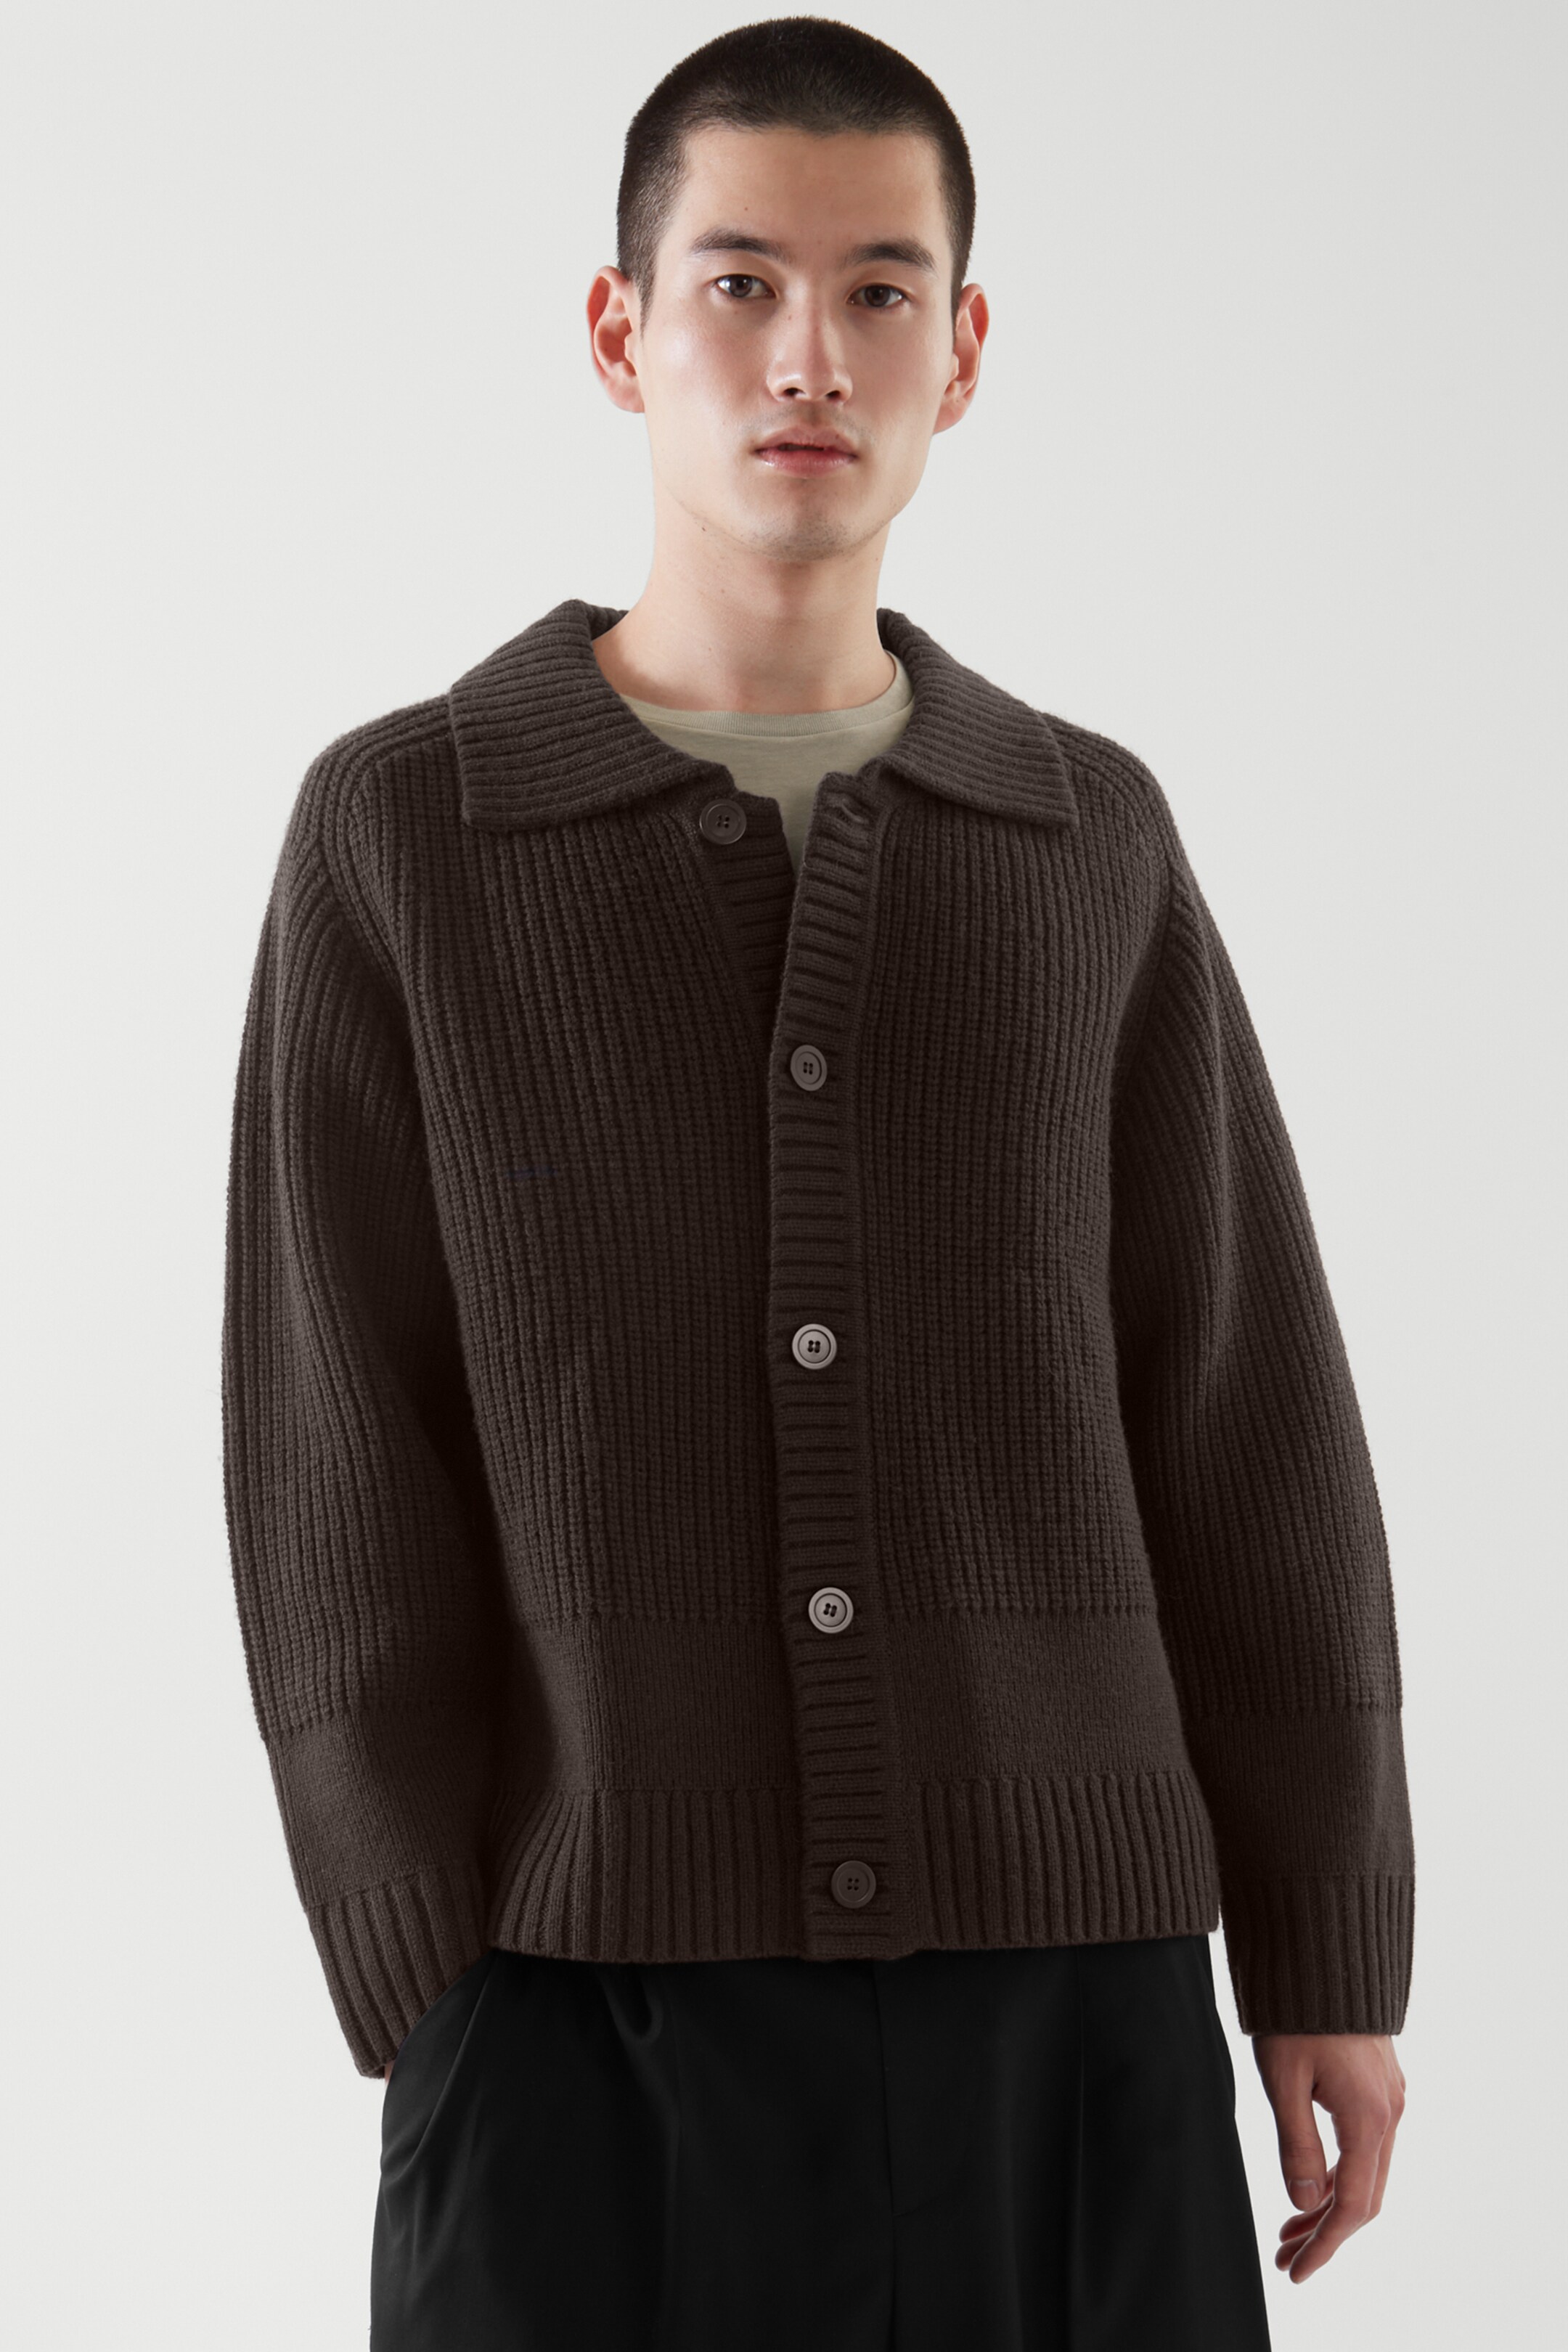 Top image of cos RIBBED KNIT WOOL CARDIGAN in BROWN